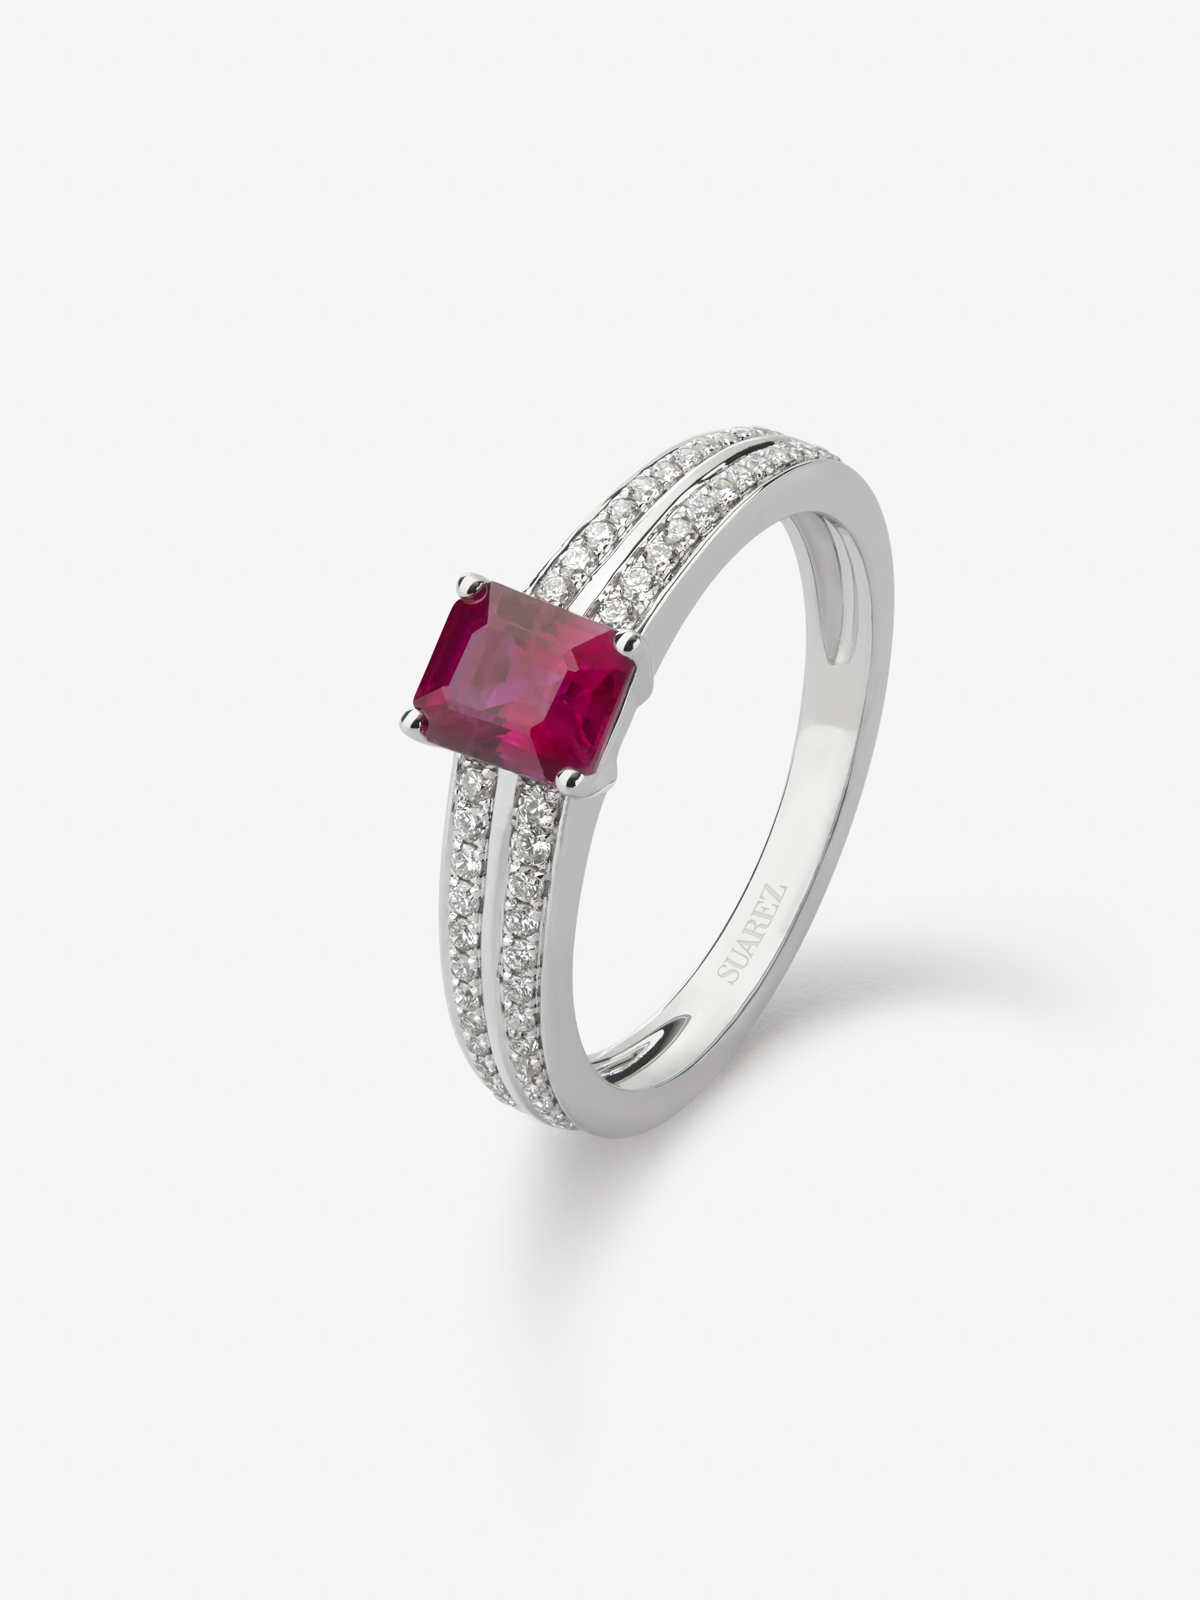 18K white gold ring with octagonal cut ruby ​​of 1,046 cts and 40 brilliant cut diamonds with a total of 0.3 cts